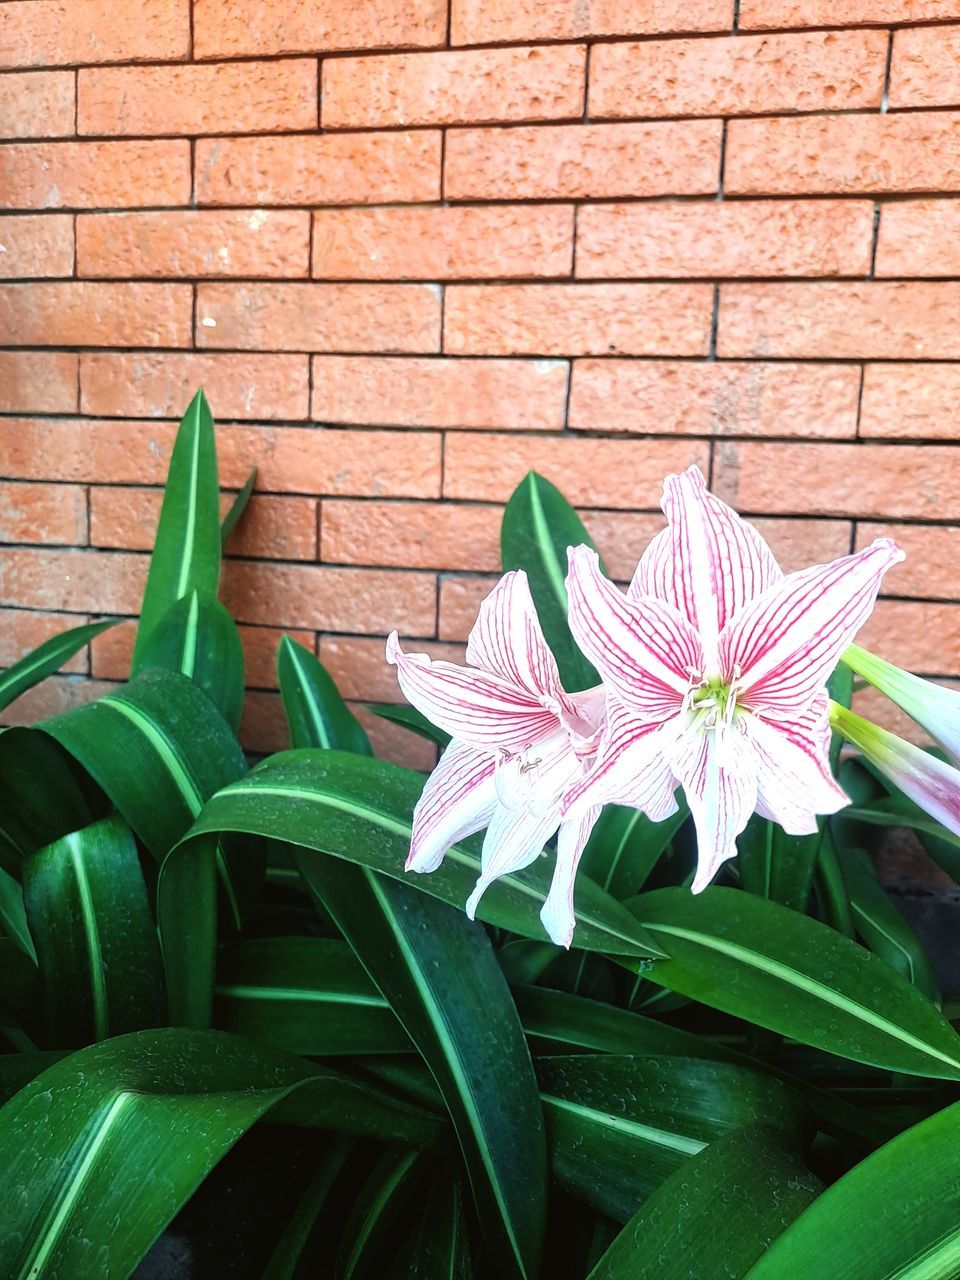 brick wall, brick, flower, plant, flowering plant, leaf, wall, plant part, green, freshness, growth, wall - building feature, beauty in nature, no people, nature, close-up, fragility, petal, day, inflorescence, flower head, grass, outdoors, lily, pink